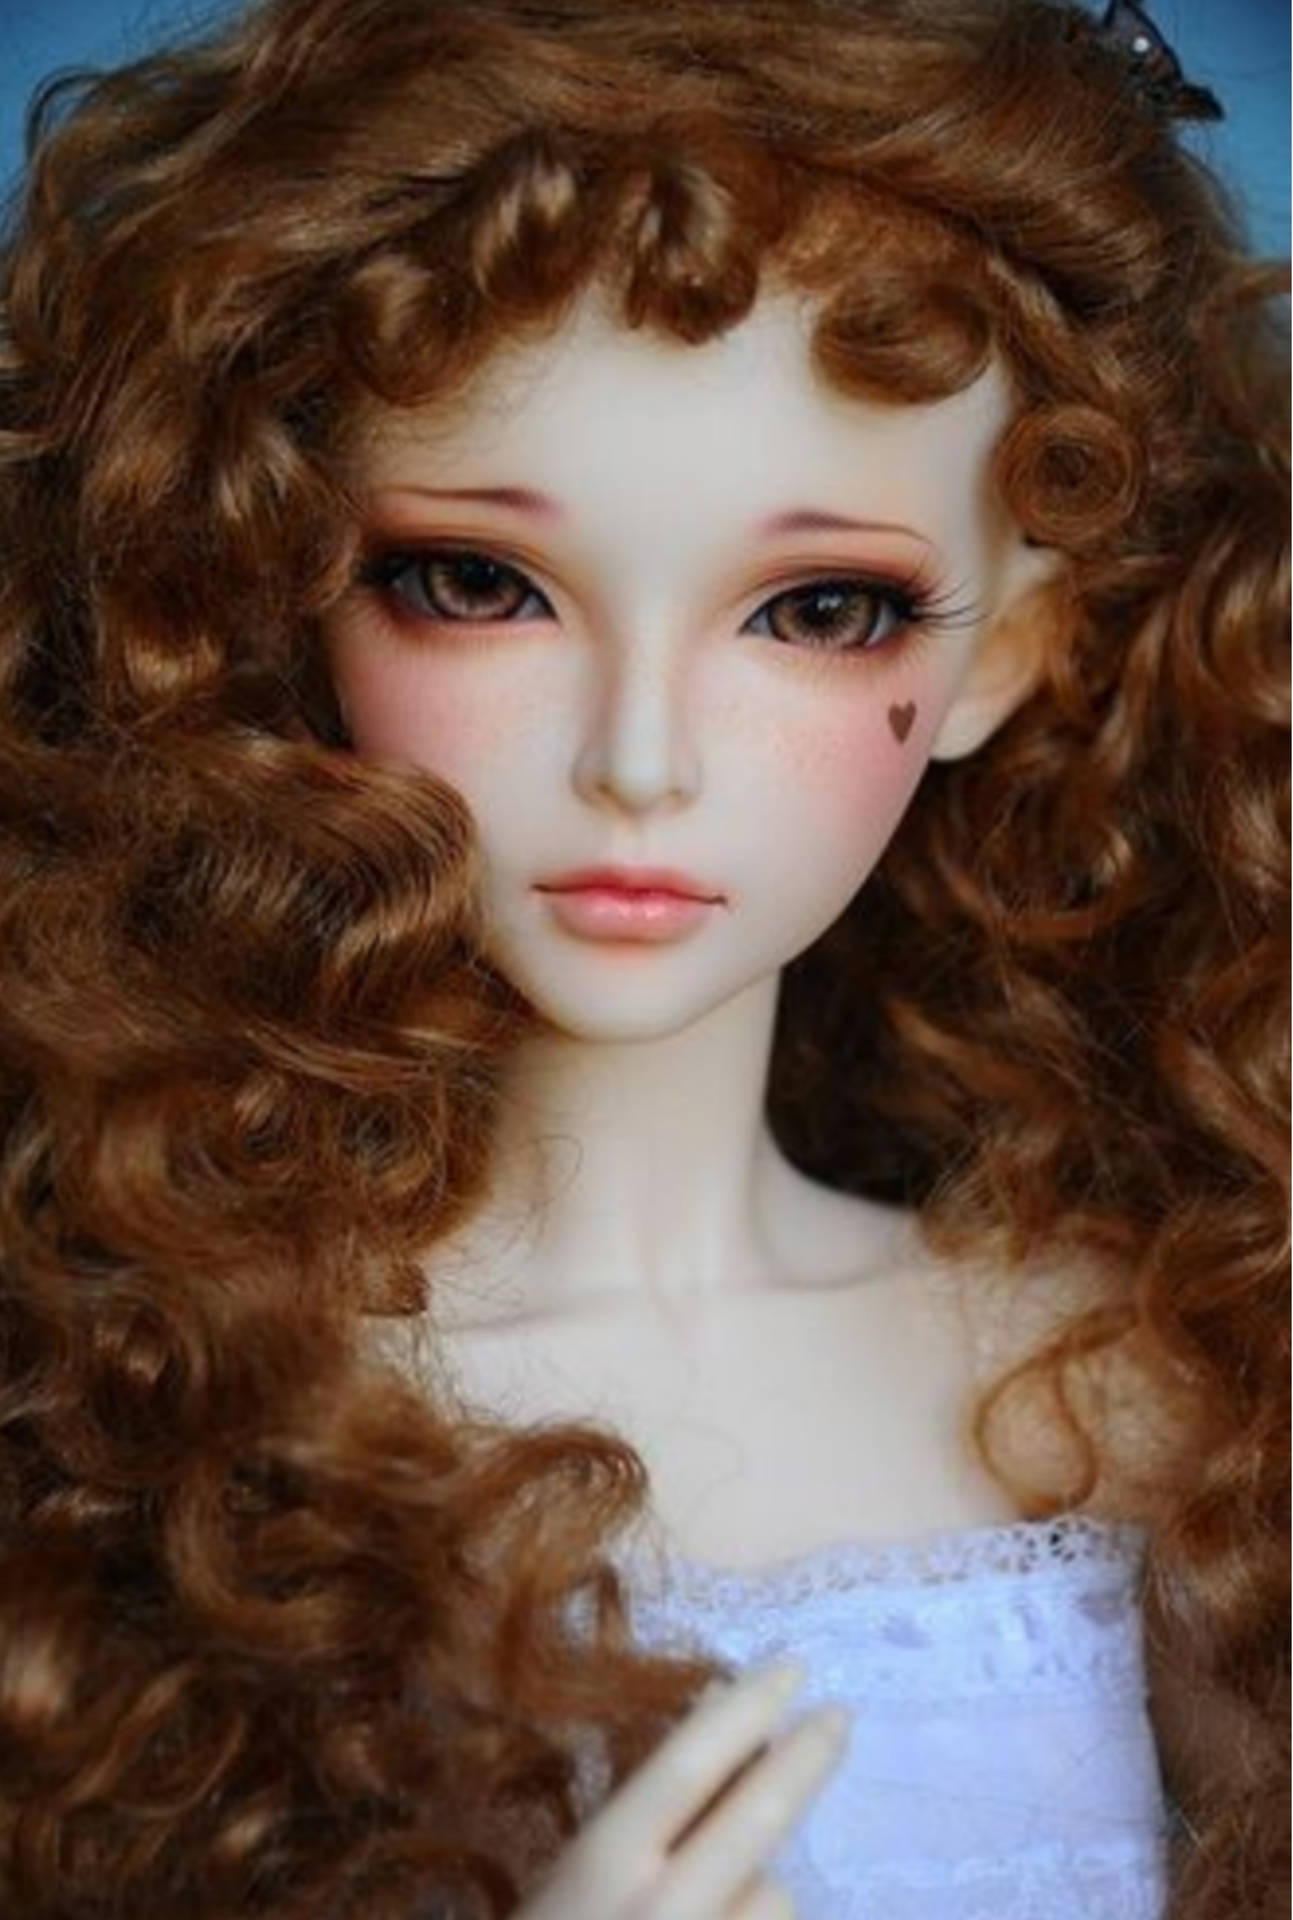 Barbie Doll With Cute Curly Hair